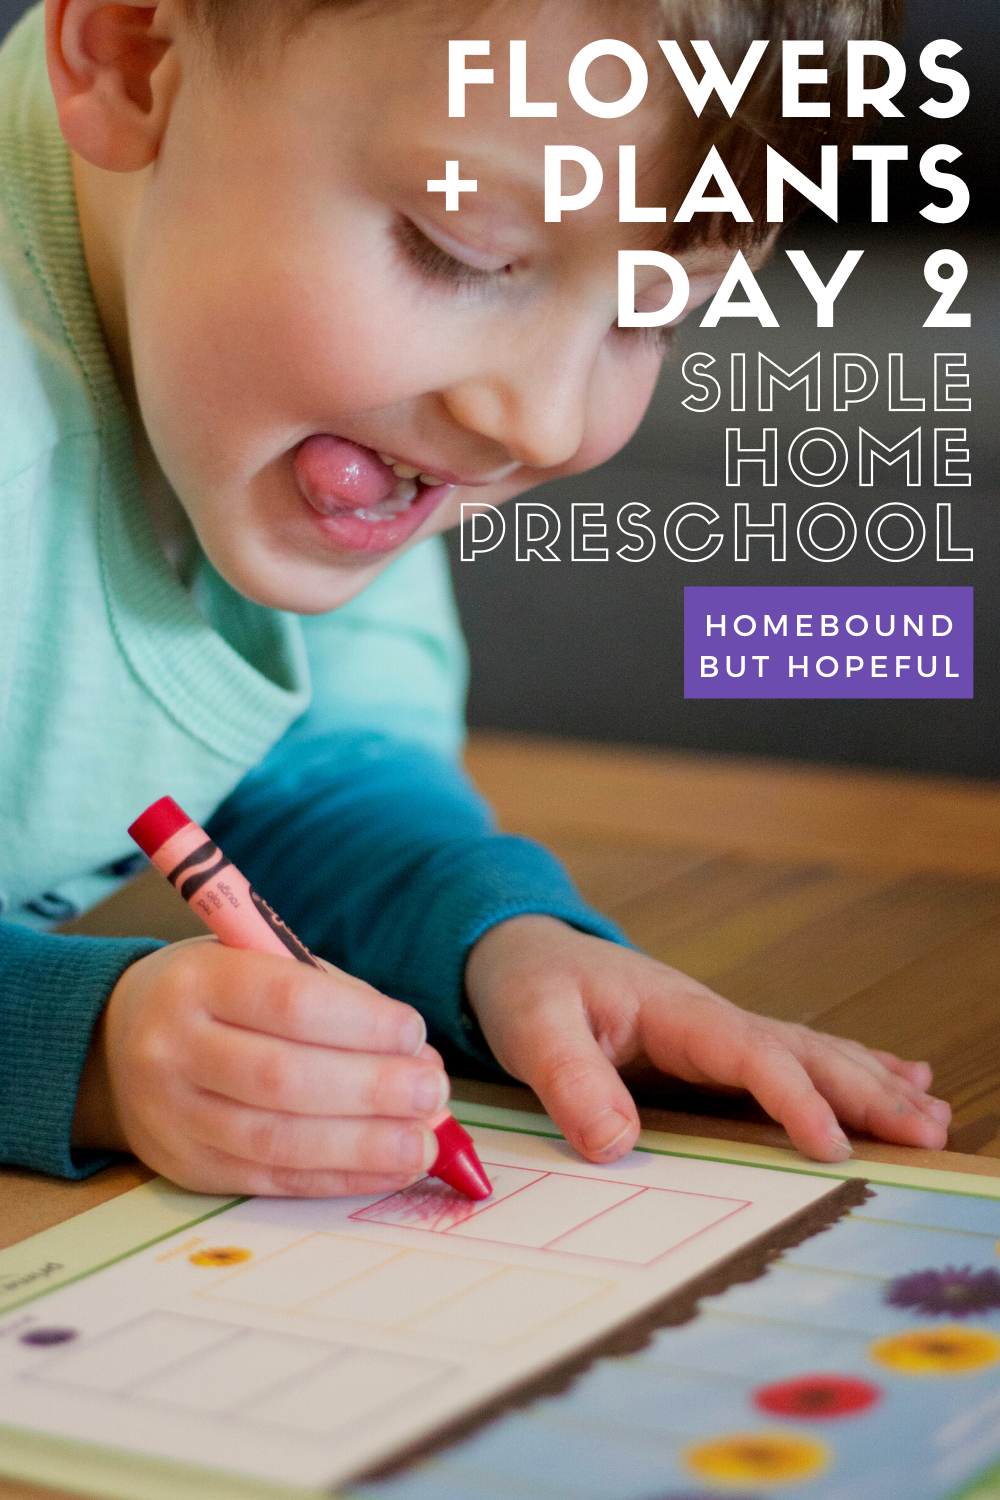 Learning about plants in home preschool provides lots of opportunities for math, science, and more. Check out how Day 2 of our flowers, plants, and seeds week went. #homepreschool #totschool #homeschool #homeschoollife #homeschoolmom